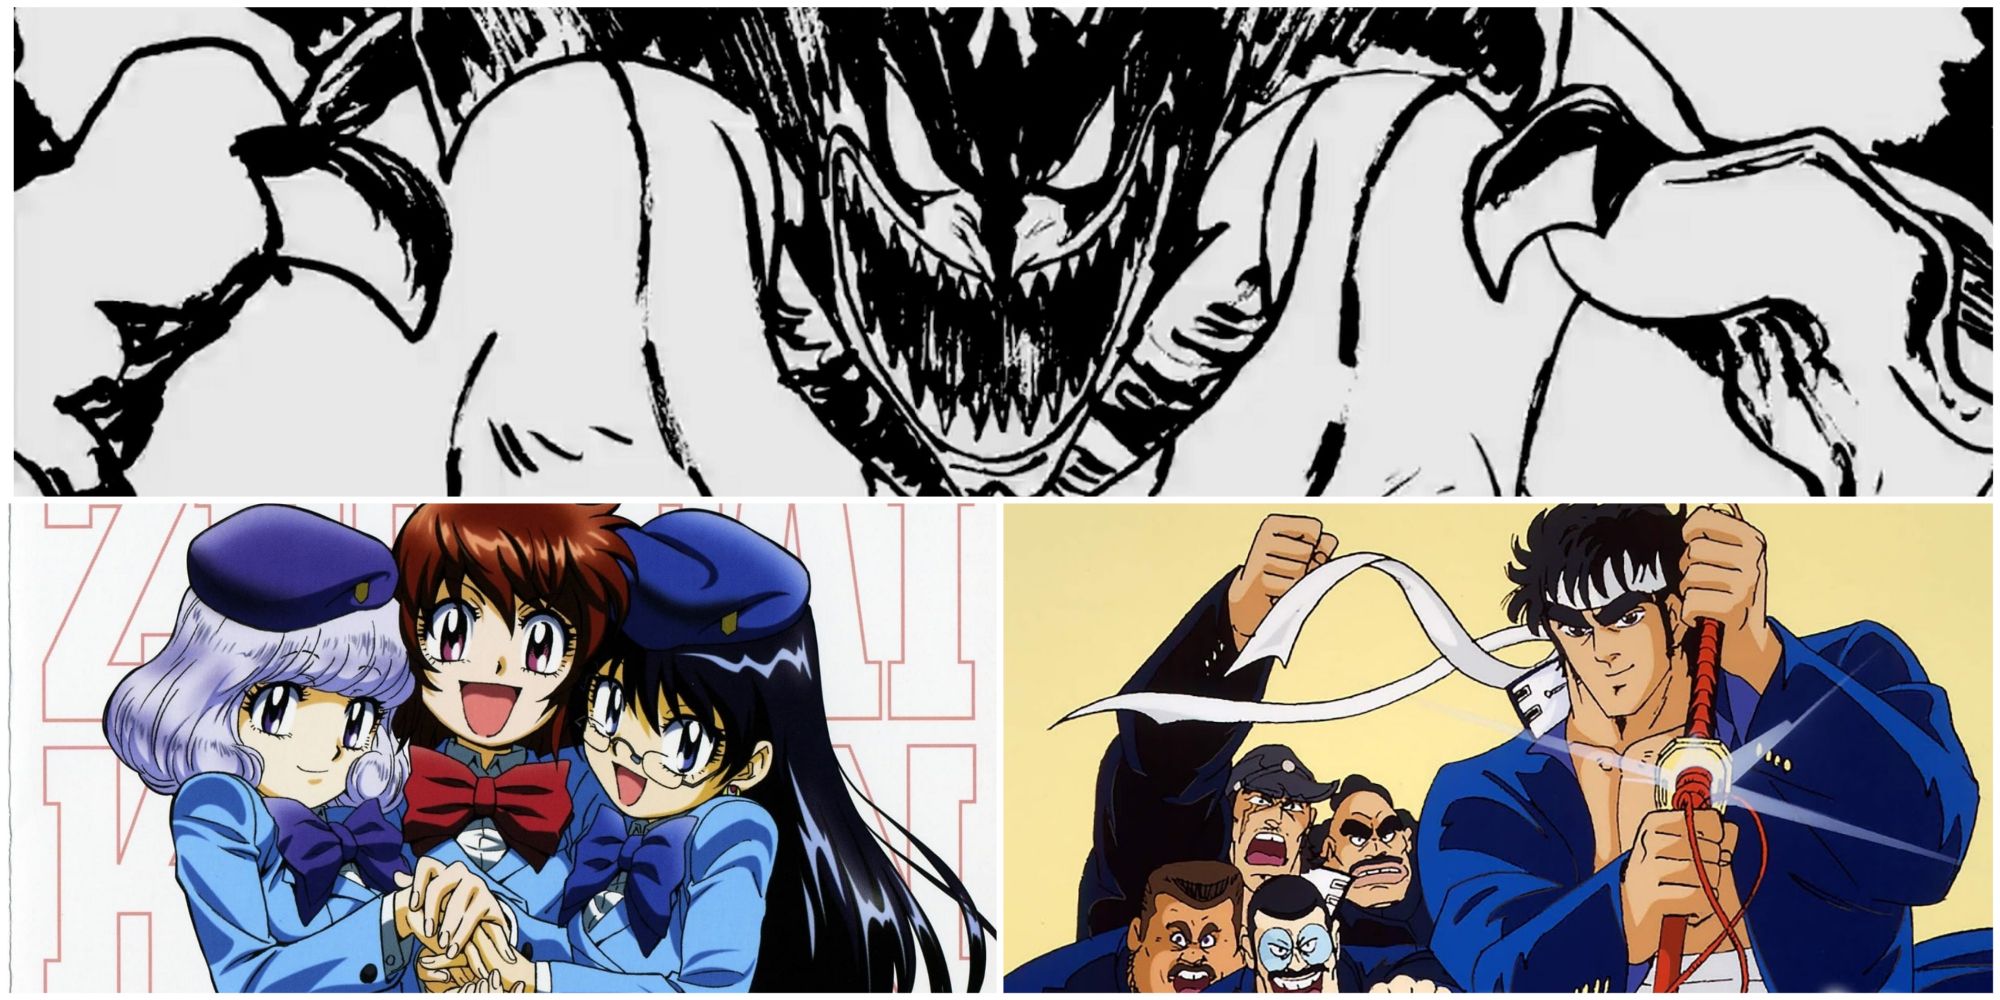 8 Battle Shonen Manga That Are Popular In Japan But Never Caught On In The West